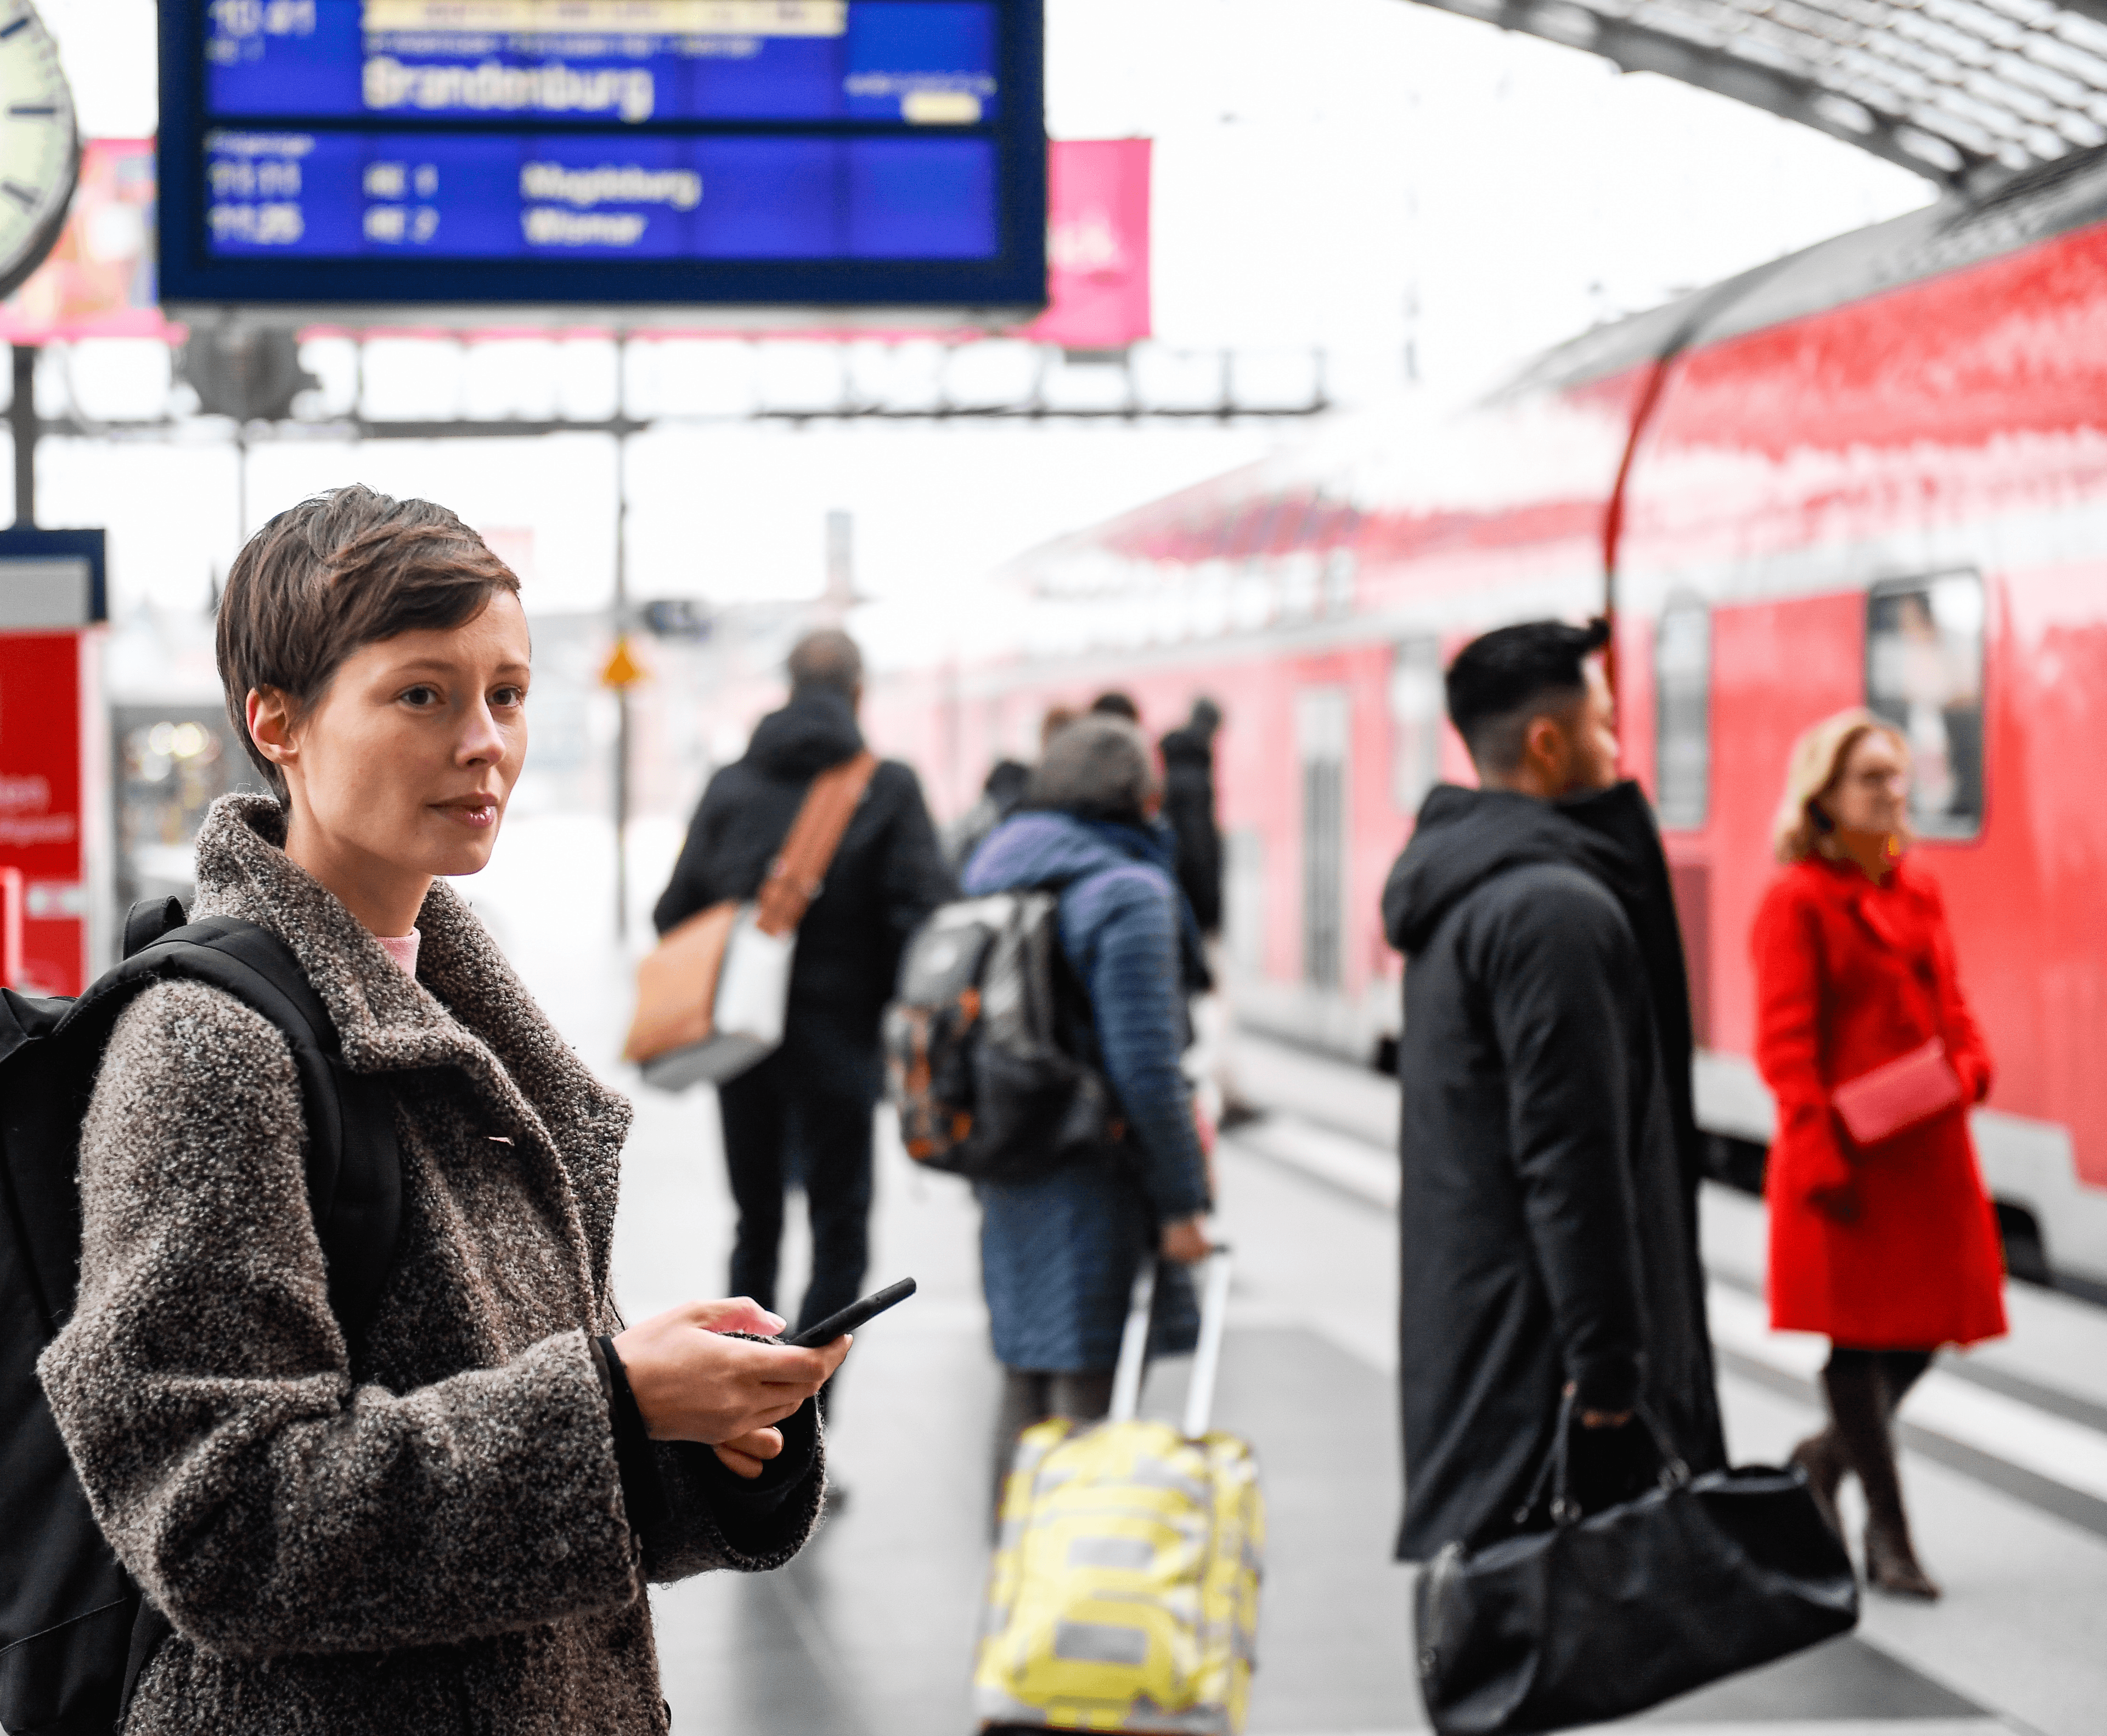 A woman on the platform at Berlin Hauptbahnhof with a smartphone in her hand.